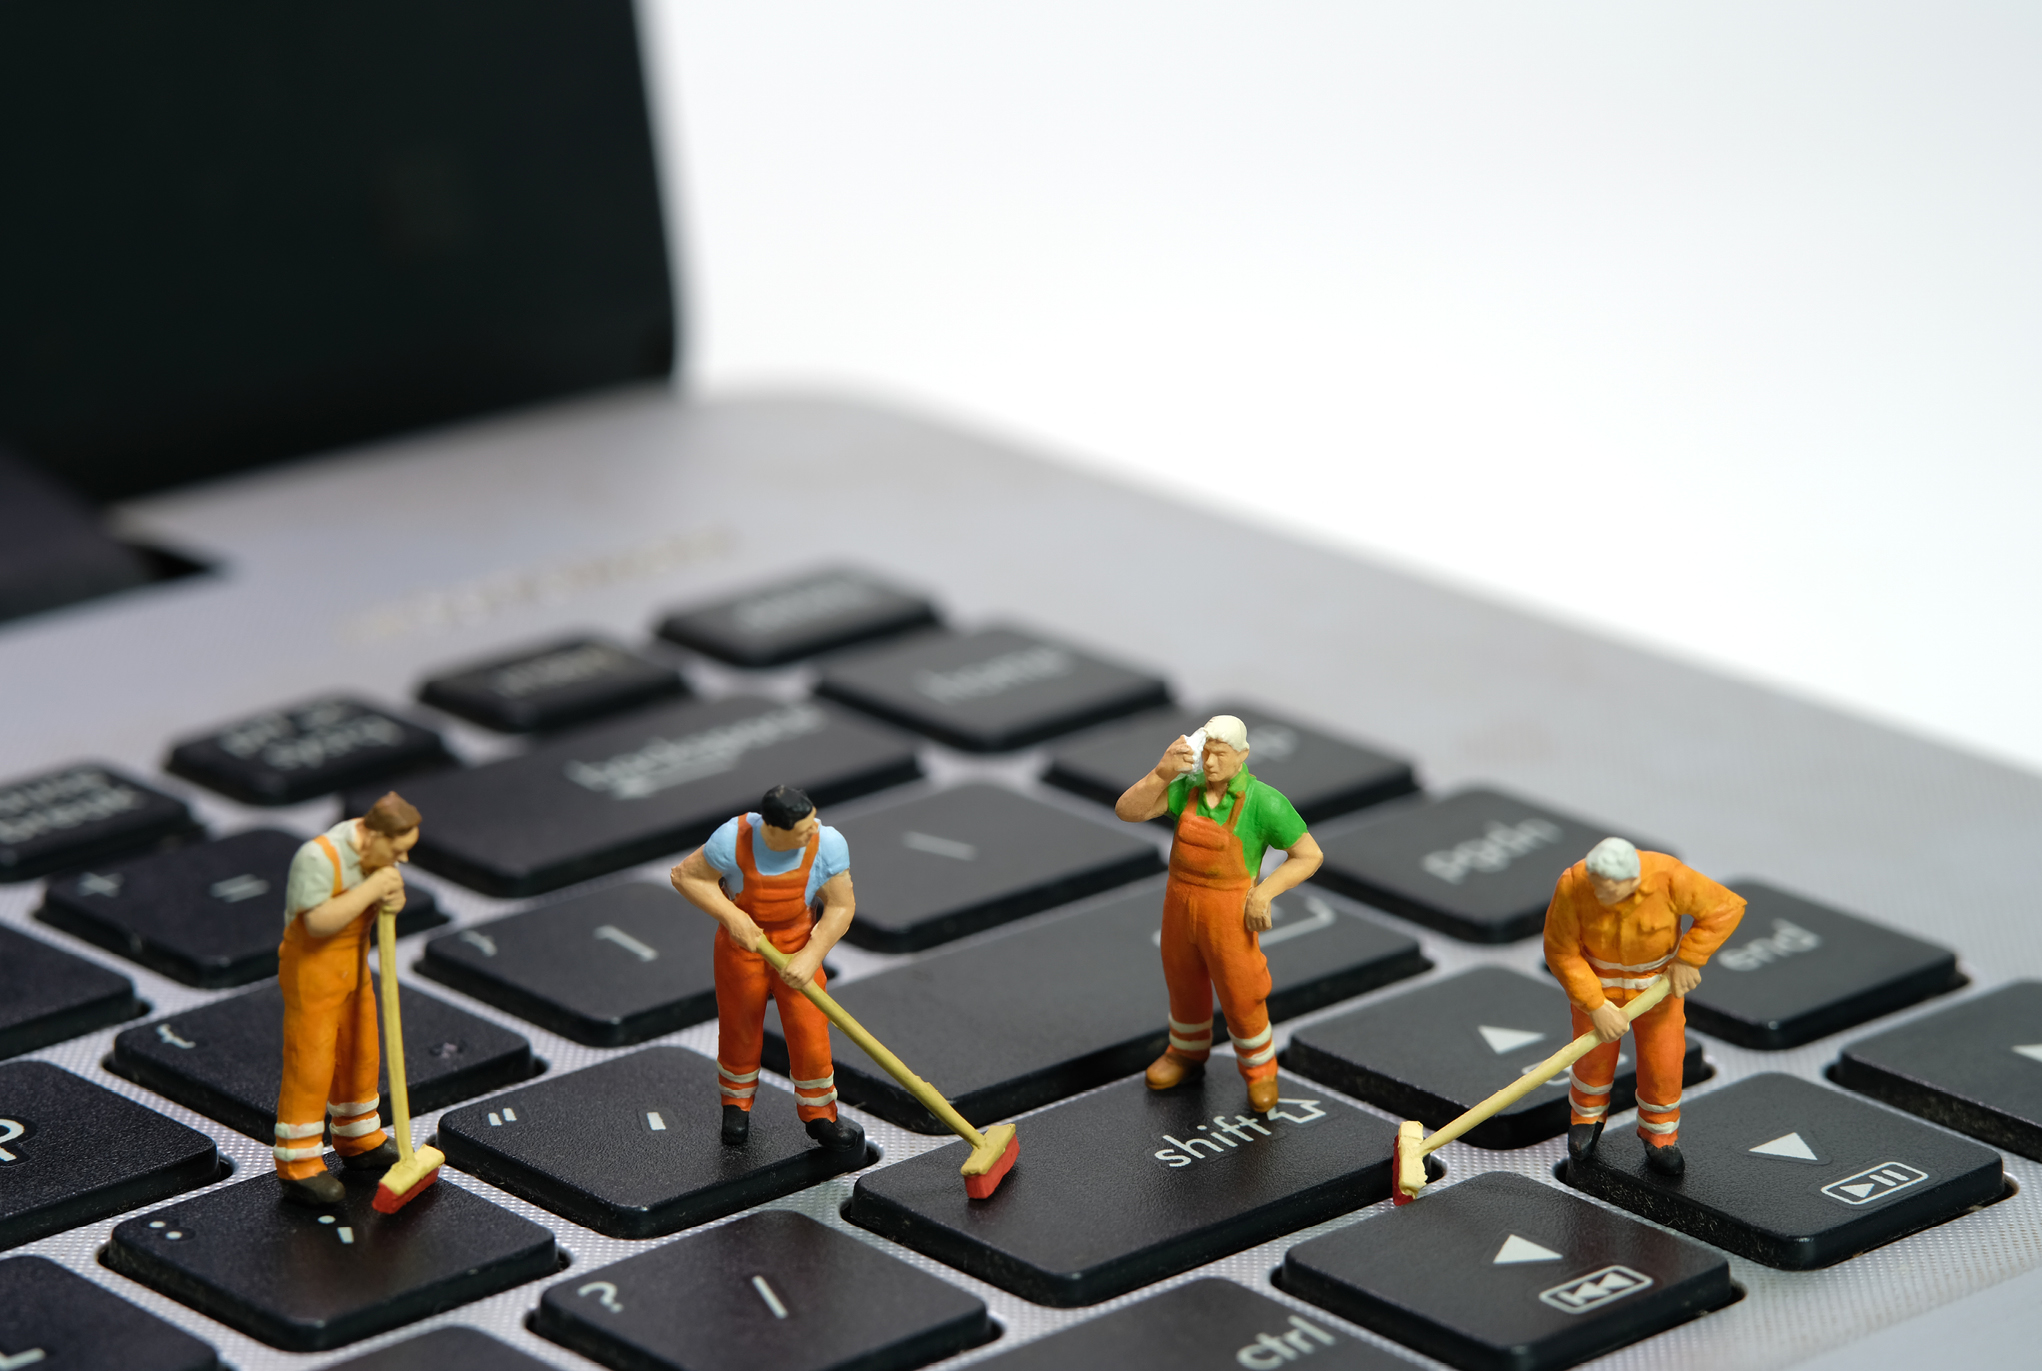 Figurines of people standing on a laptop keyboard and cleaning